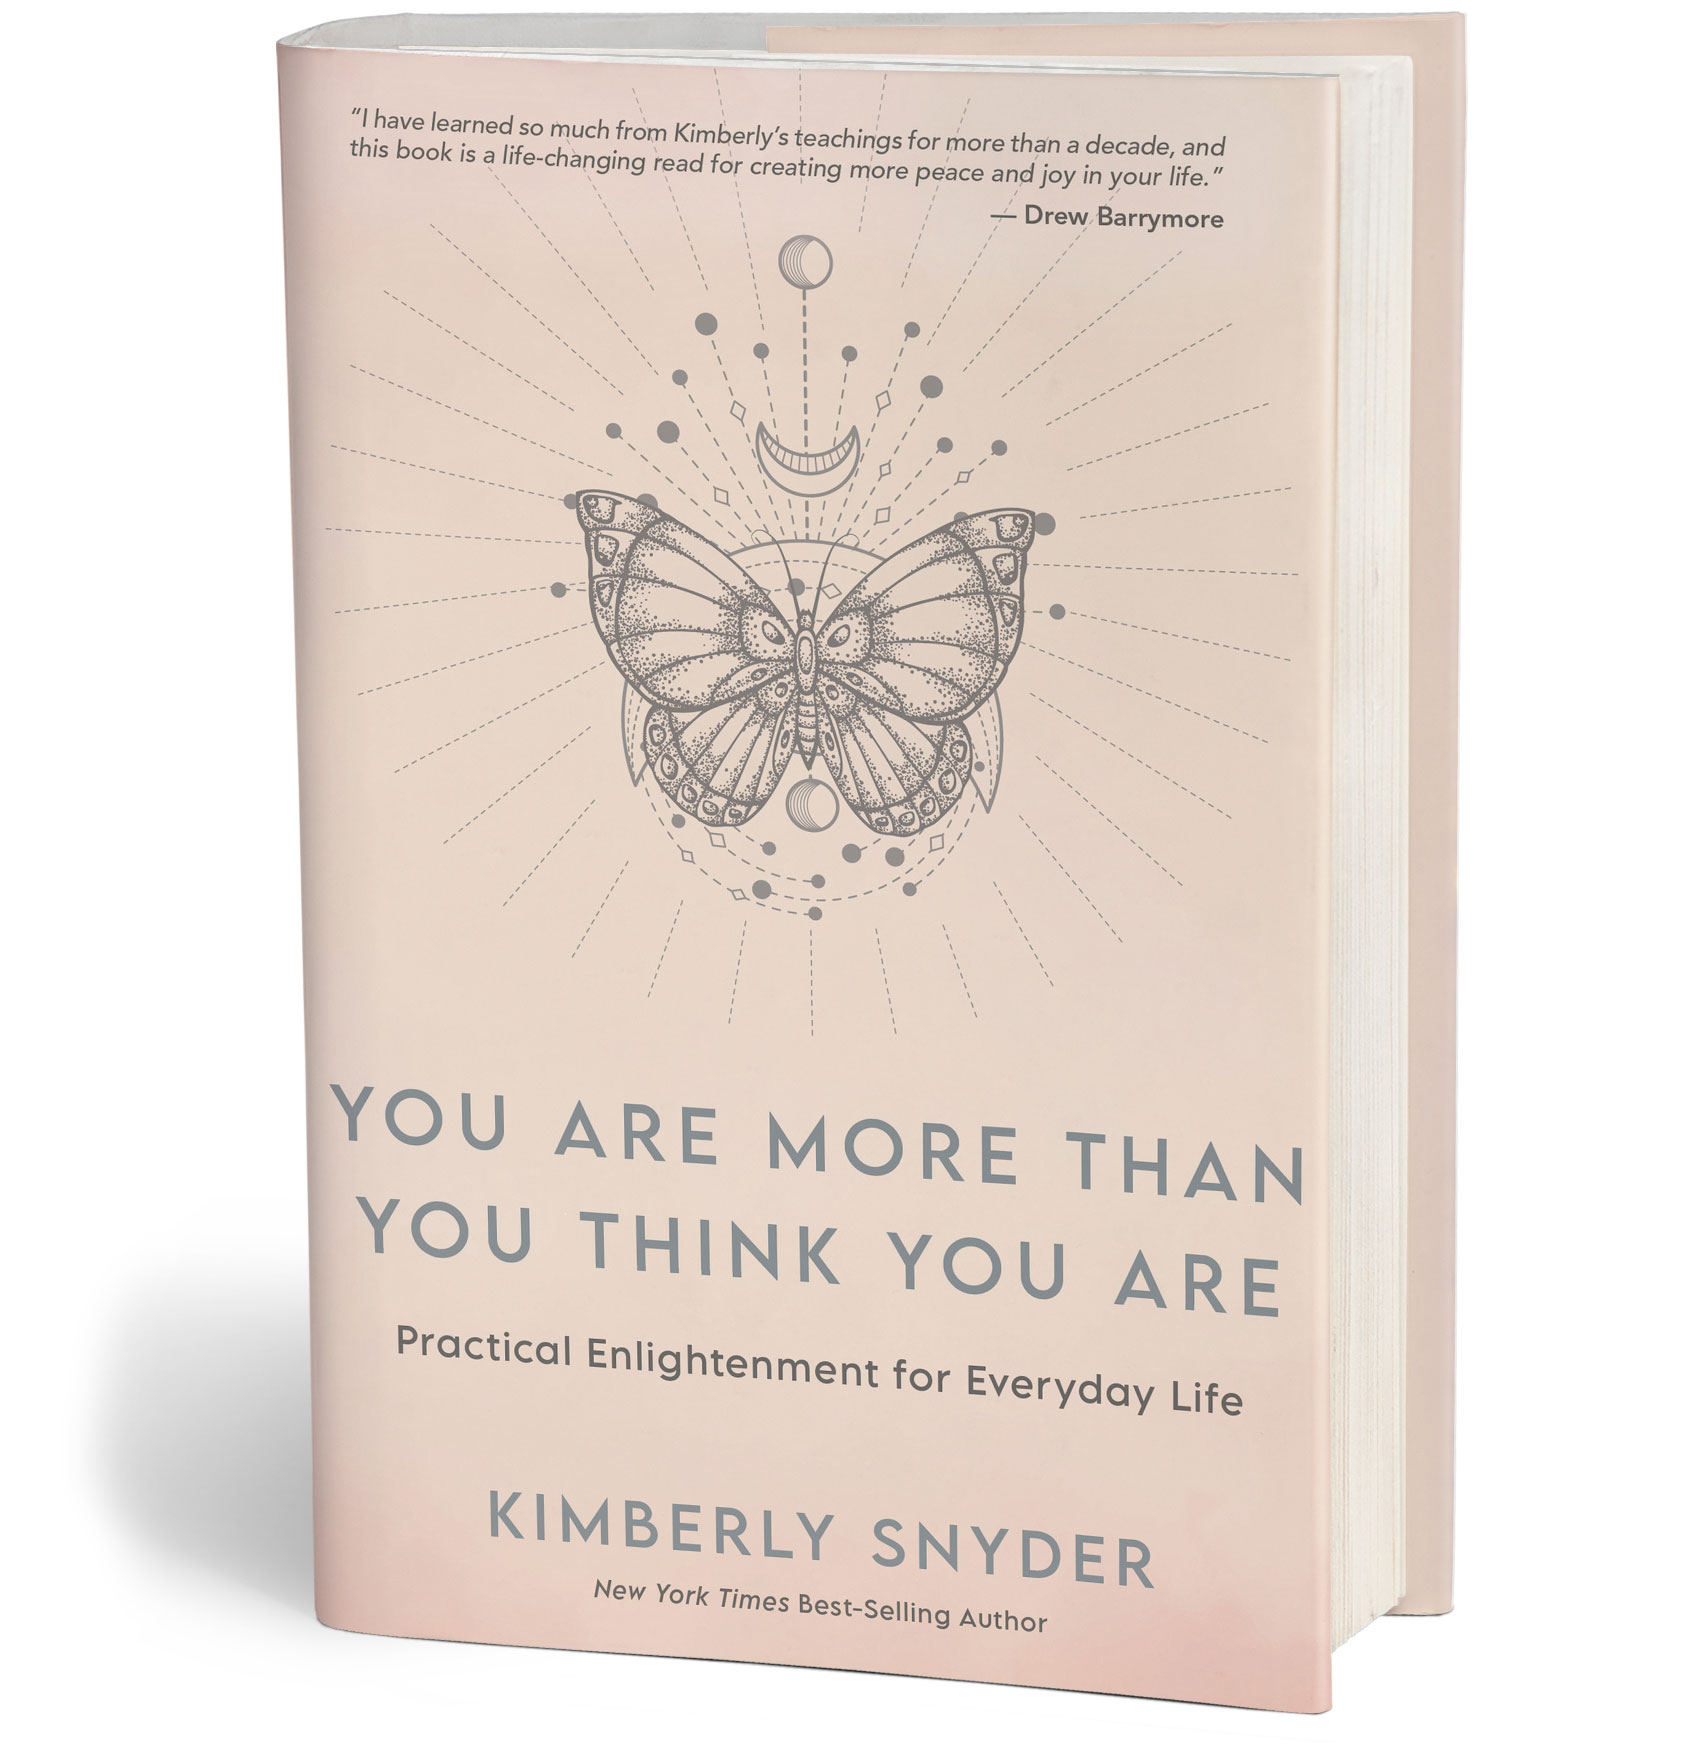 You Are More Than You Think You Are 3D Mockup